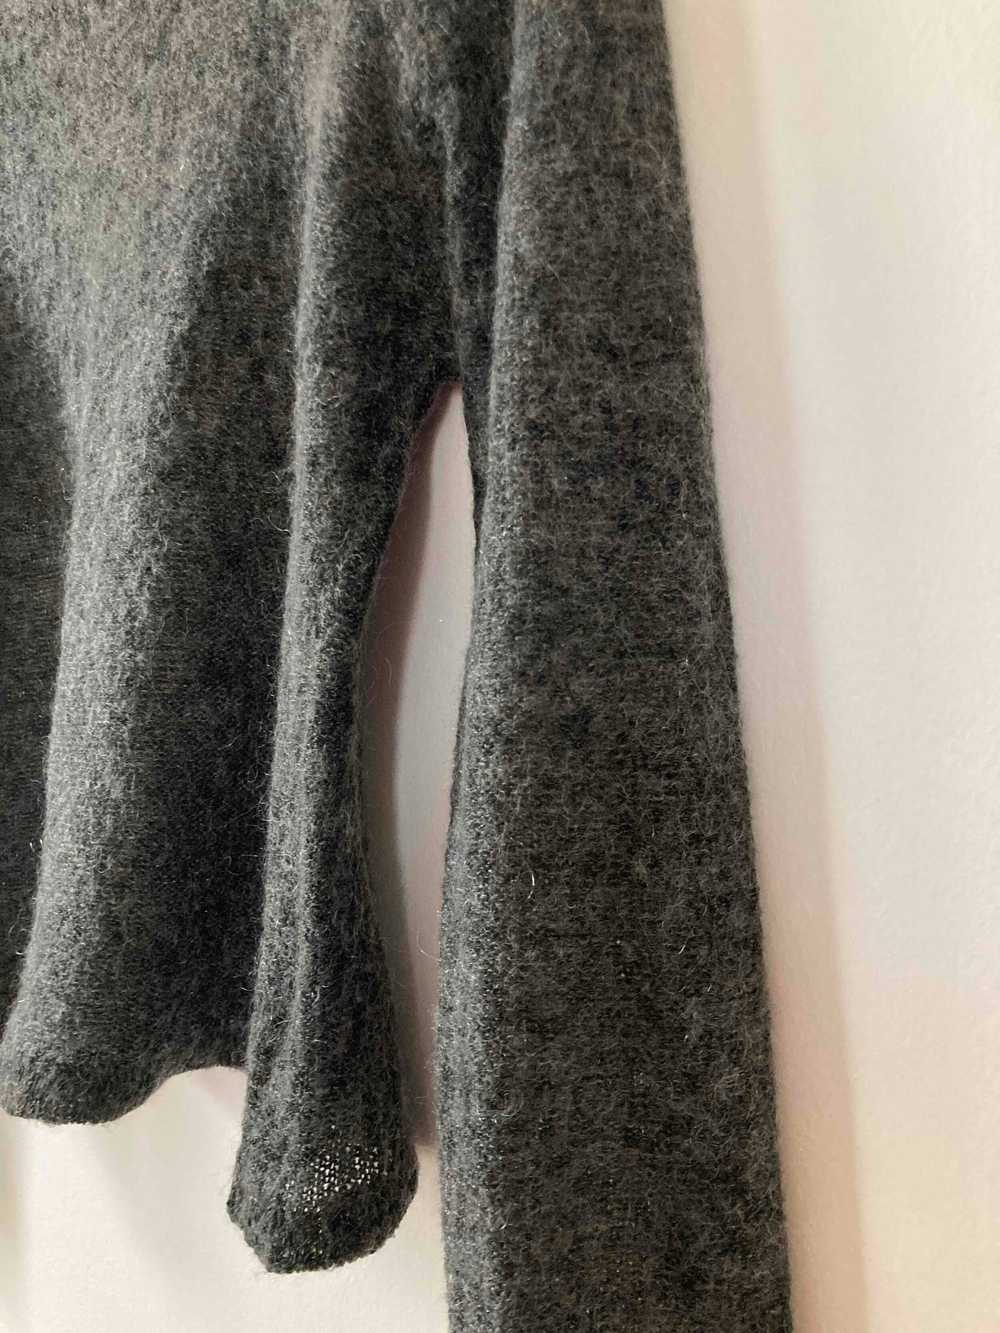 Mohair sweater - 90s mohair sweater Very fine and… - image 3